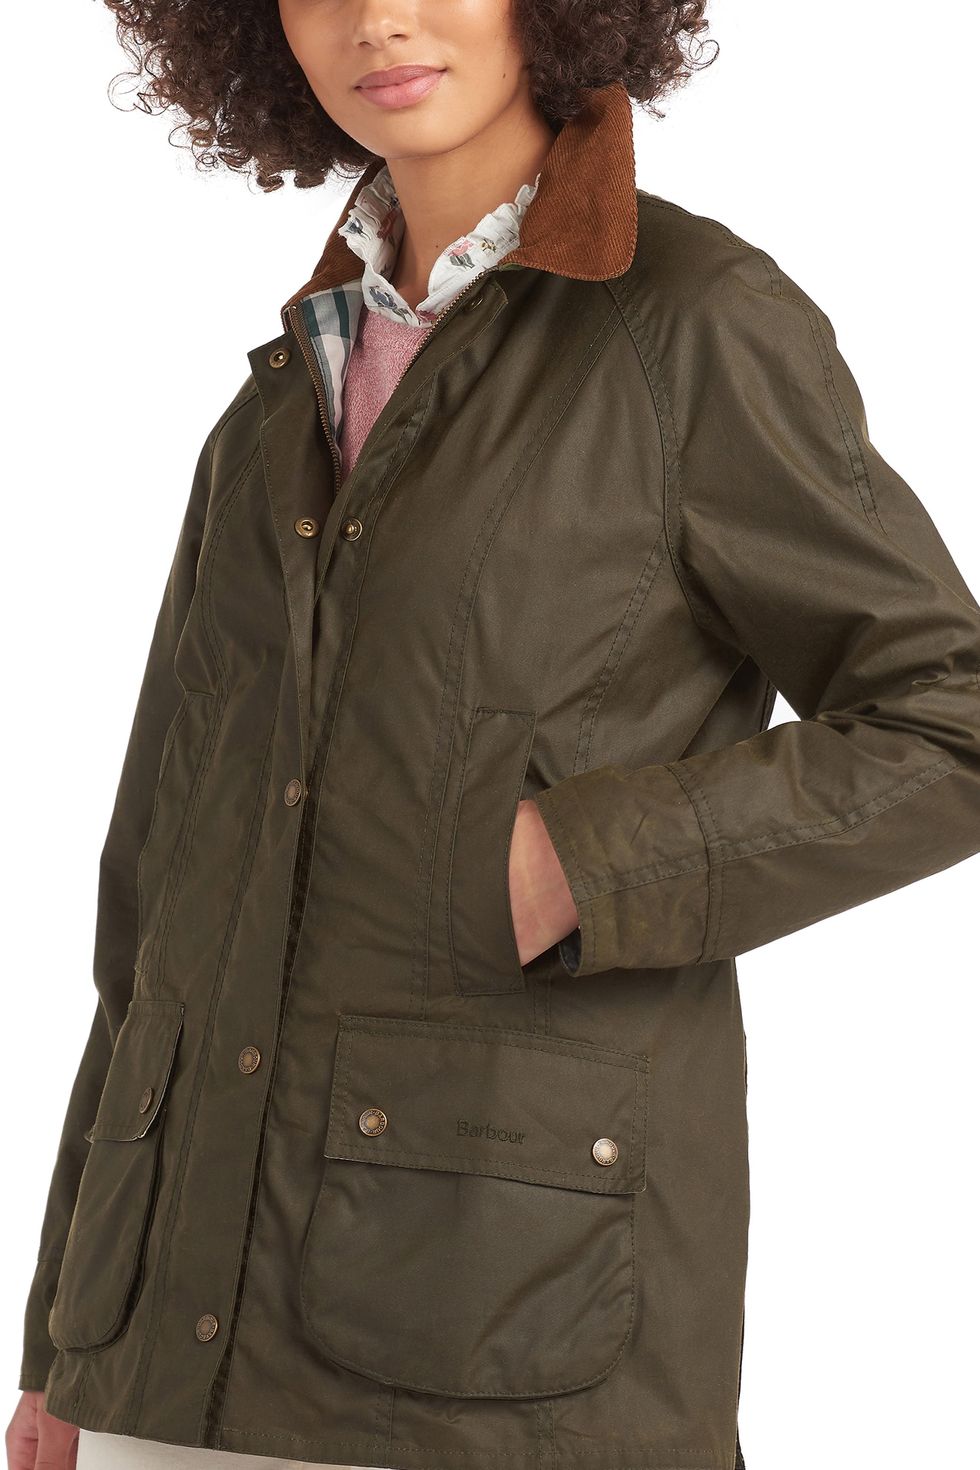 Barbour Aintree Waxed Cotton Jacket